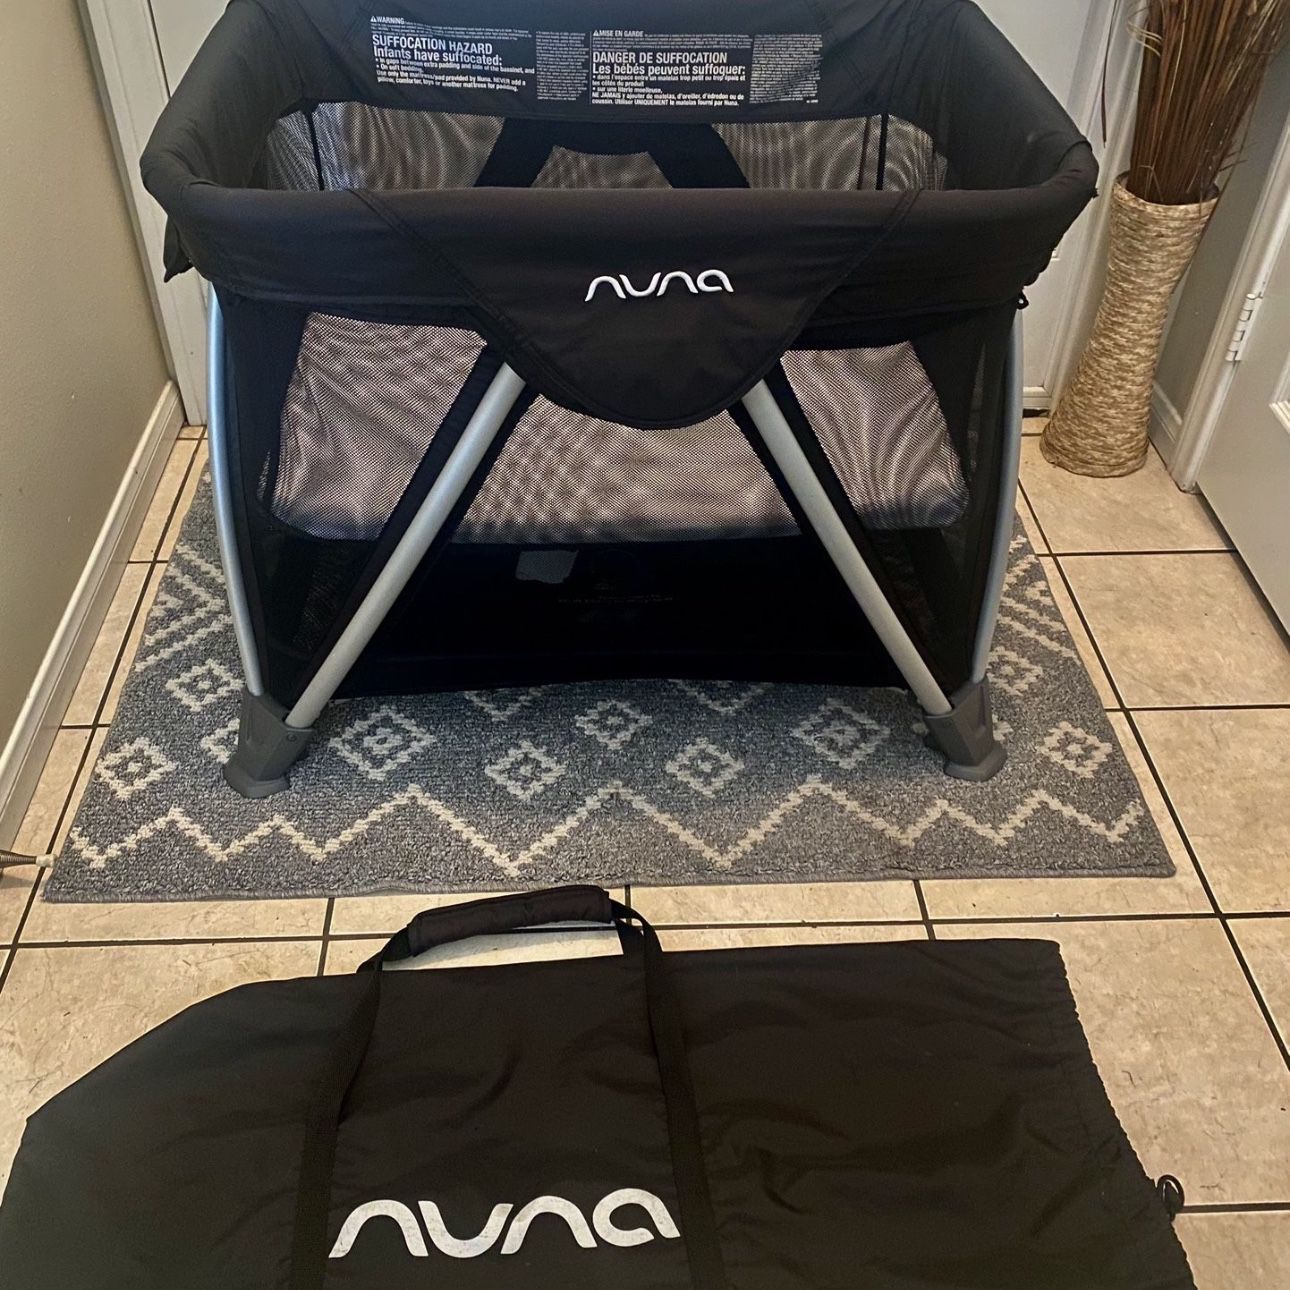 Nuna Mini Playpen/ Play Yard Black With Carry Bag Included 